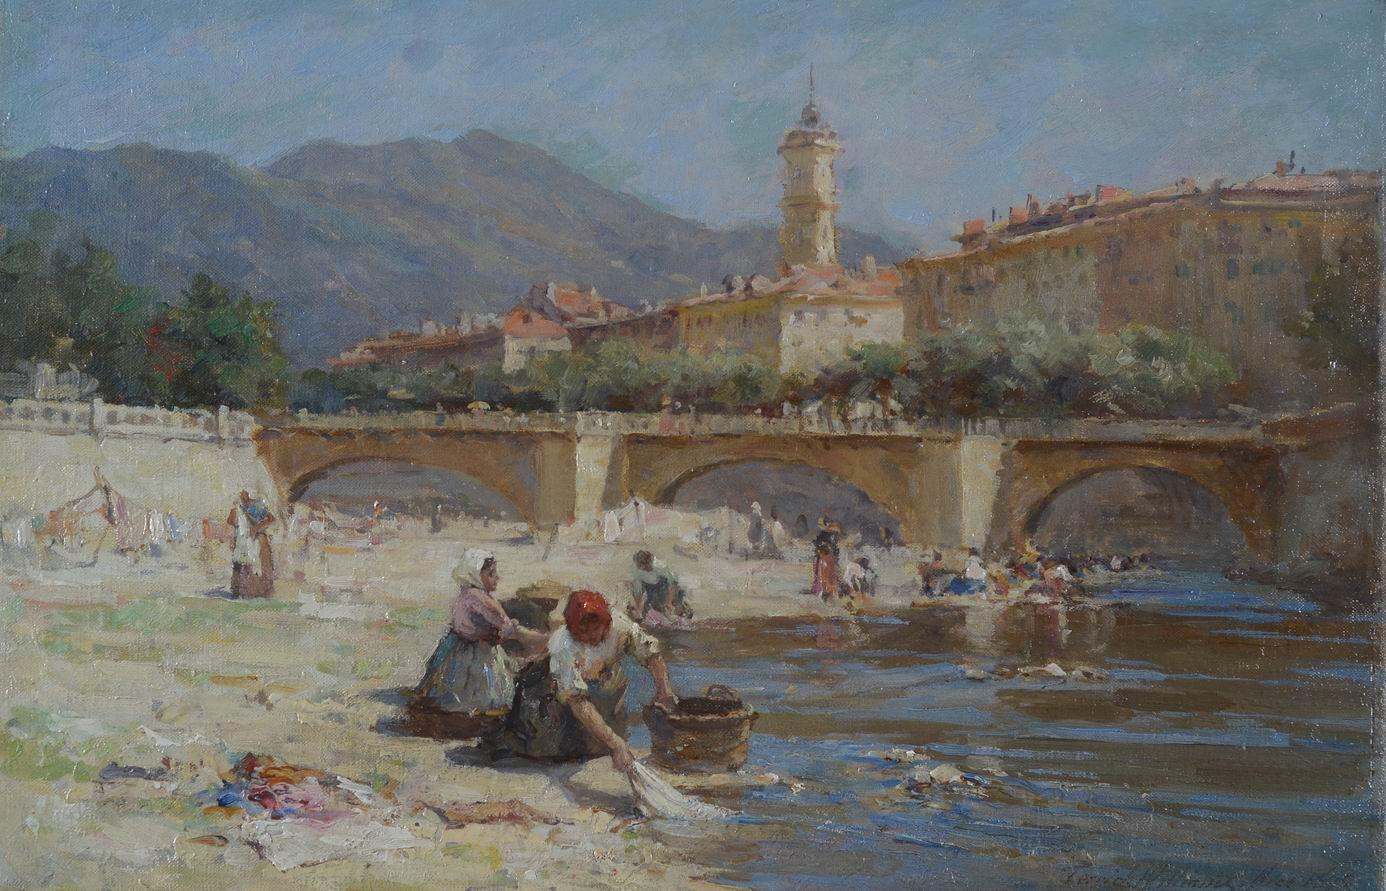 Terrick Williams Landscape Painting - Washerwomen on bank of River at Nice, France - Bridge and town Impressionist Oil